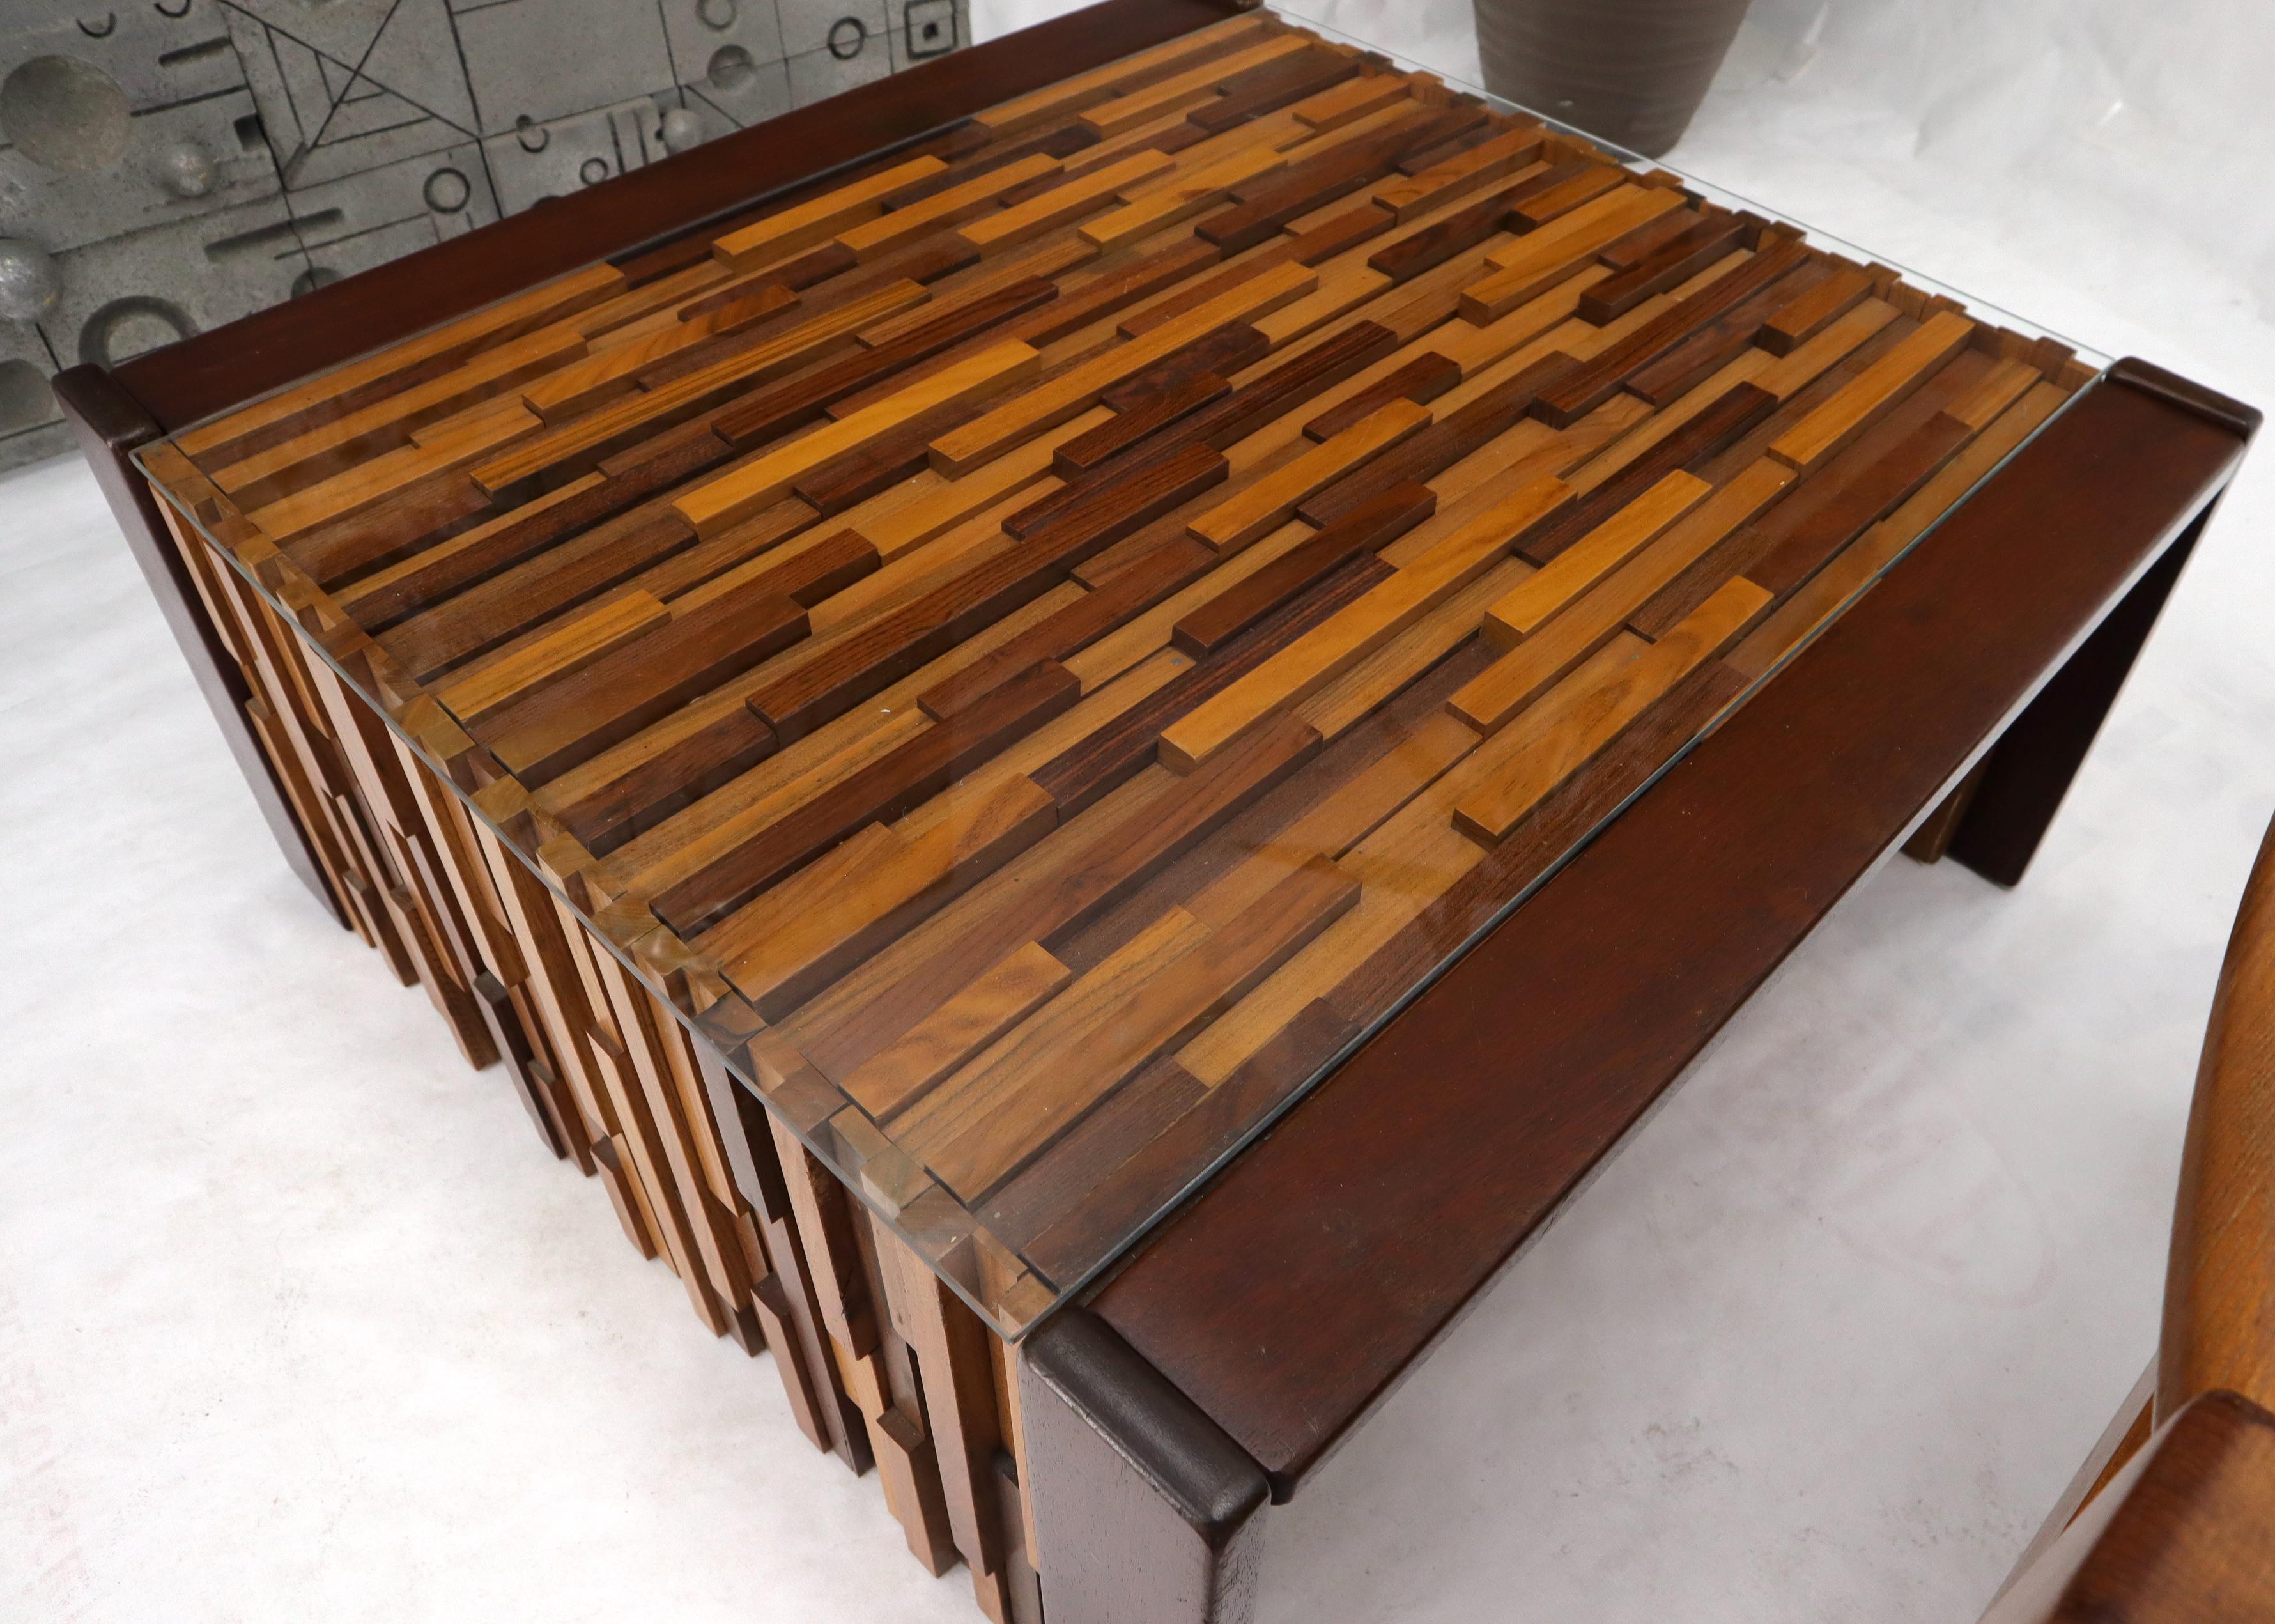 Hardwood Pair of Percival Lafer Coffee Table Brazilian Rosewood Exotic Wood Mosaic For Sale